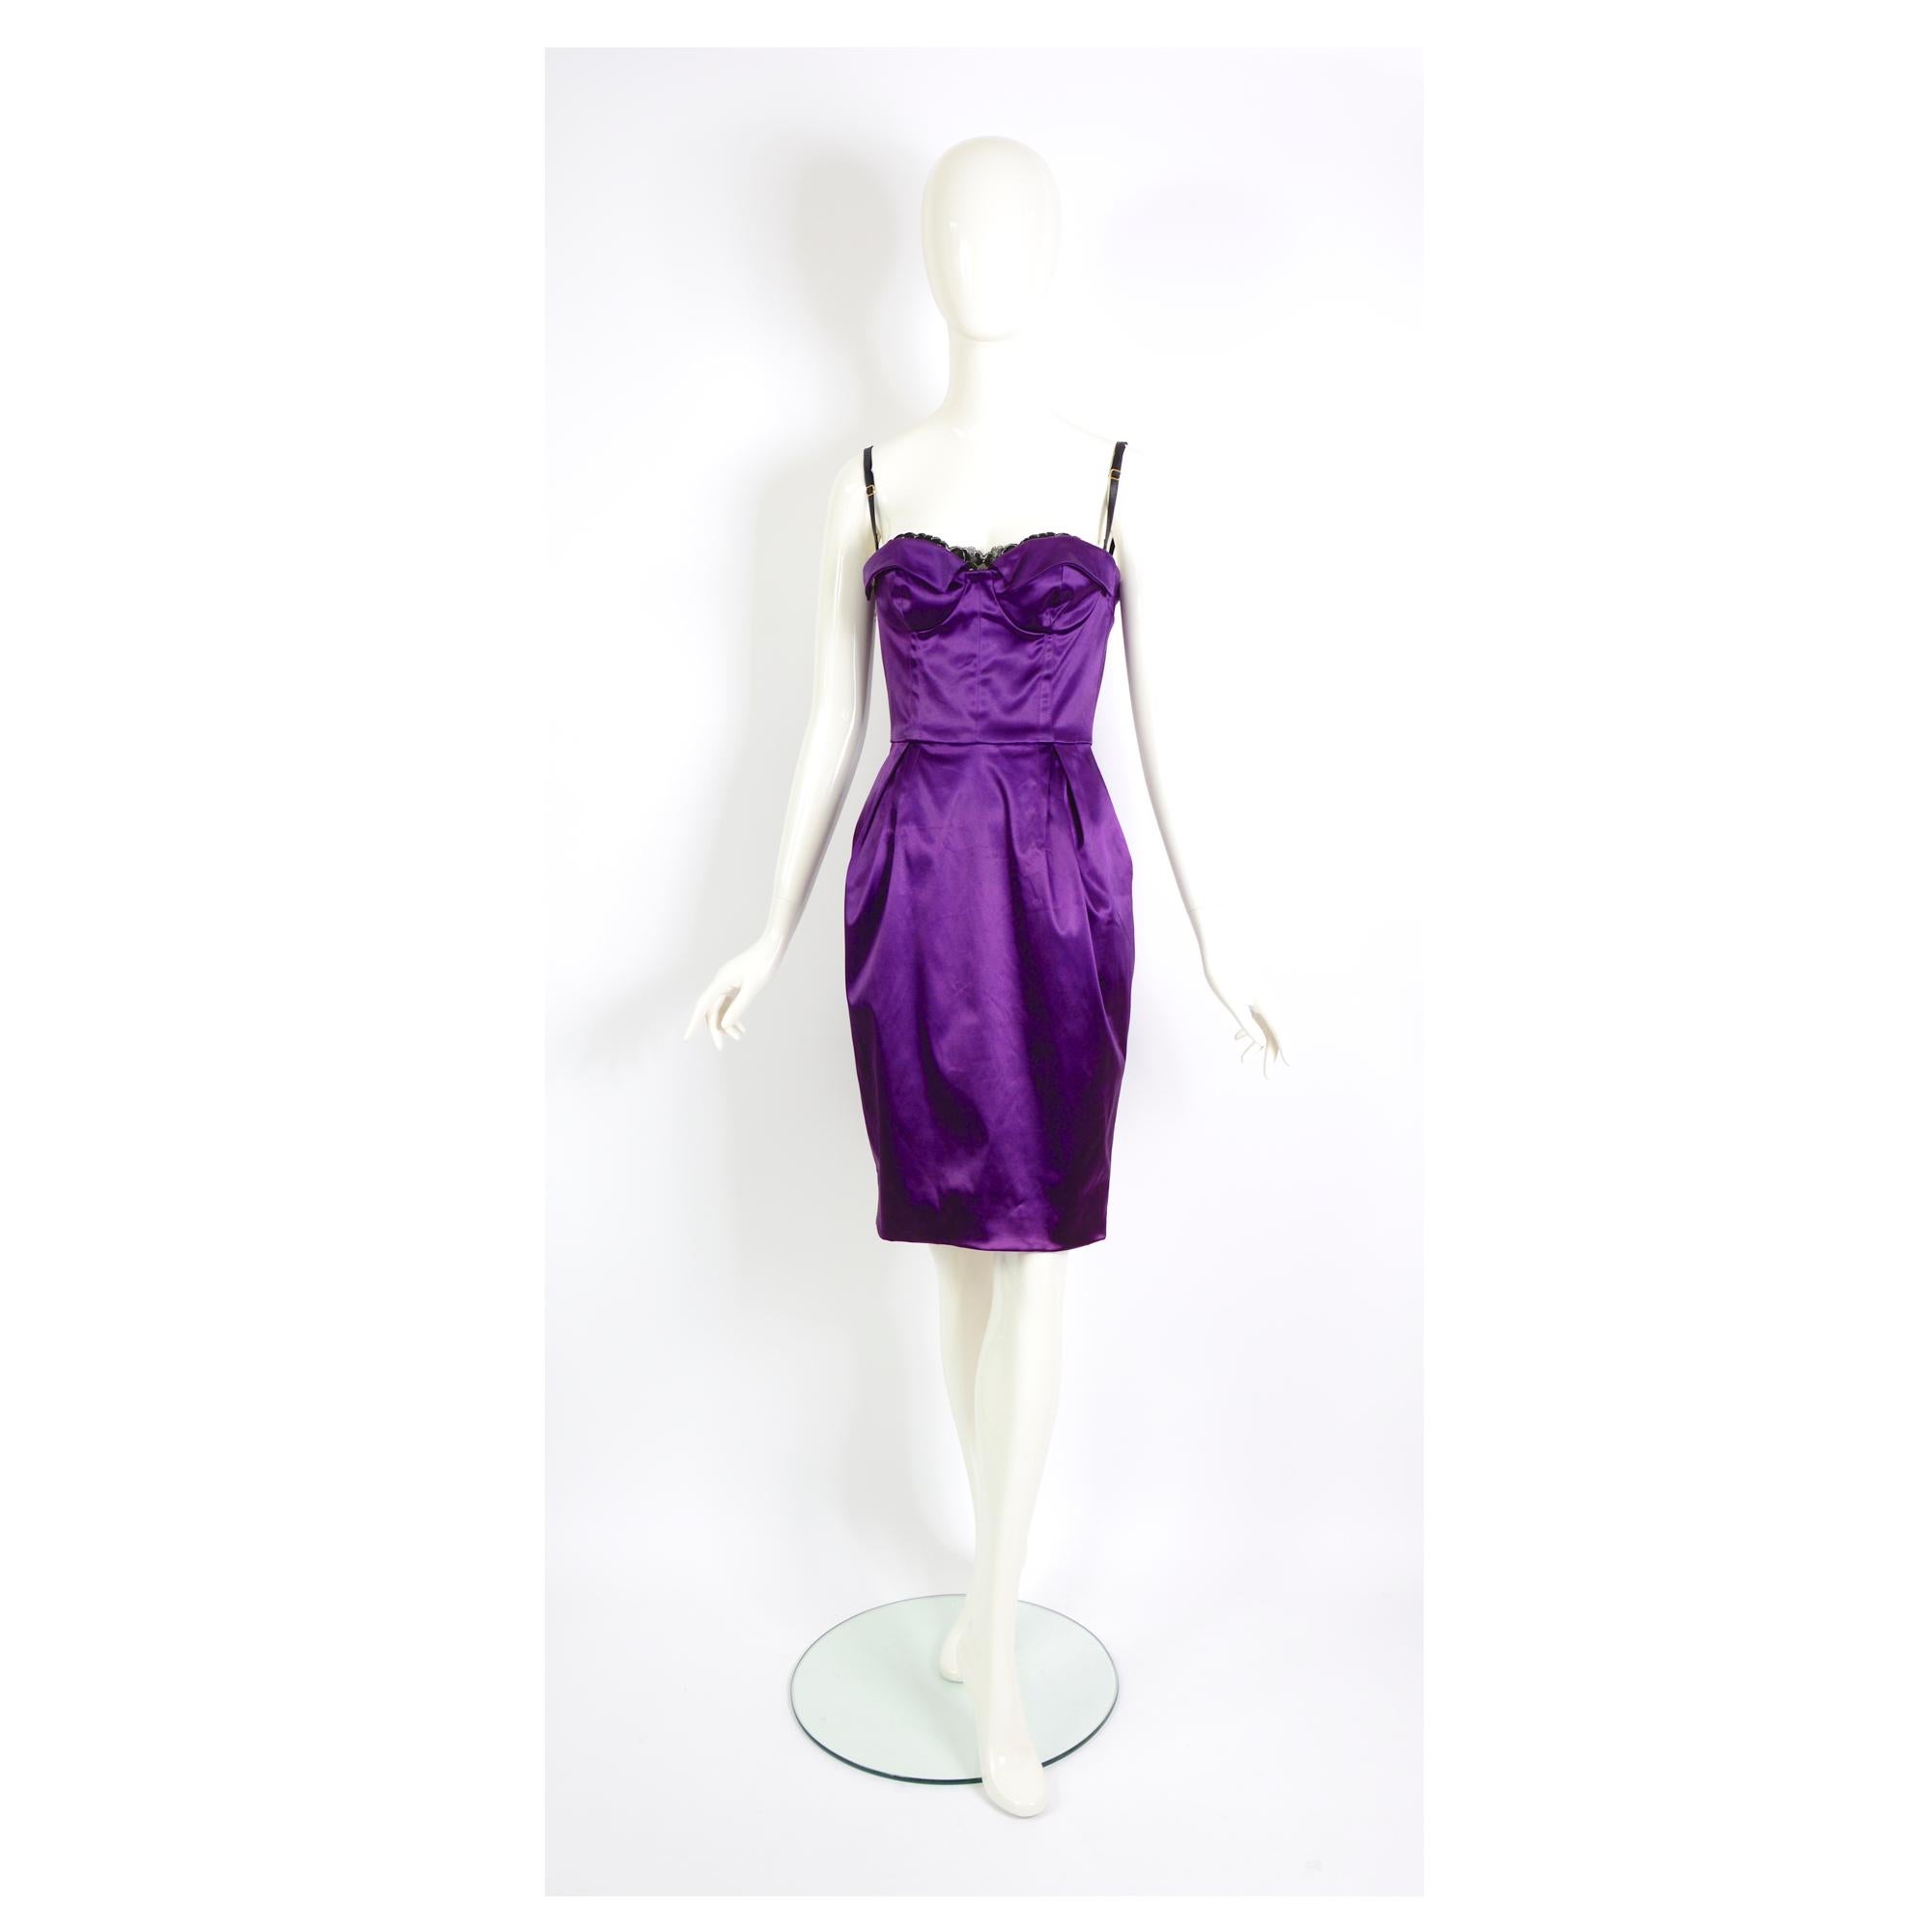 Dolce & Gabbana adorable vintage strapless leopard lining & lace trim purple dress 
With front slide pockets
Size 42
Please use the measurements taken flat for the perfect fit
Bust 16inch/41cm(x2)
Waist  13inch/33cm(x2)
Hips  17inch/43cm(x2)
Length